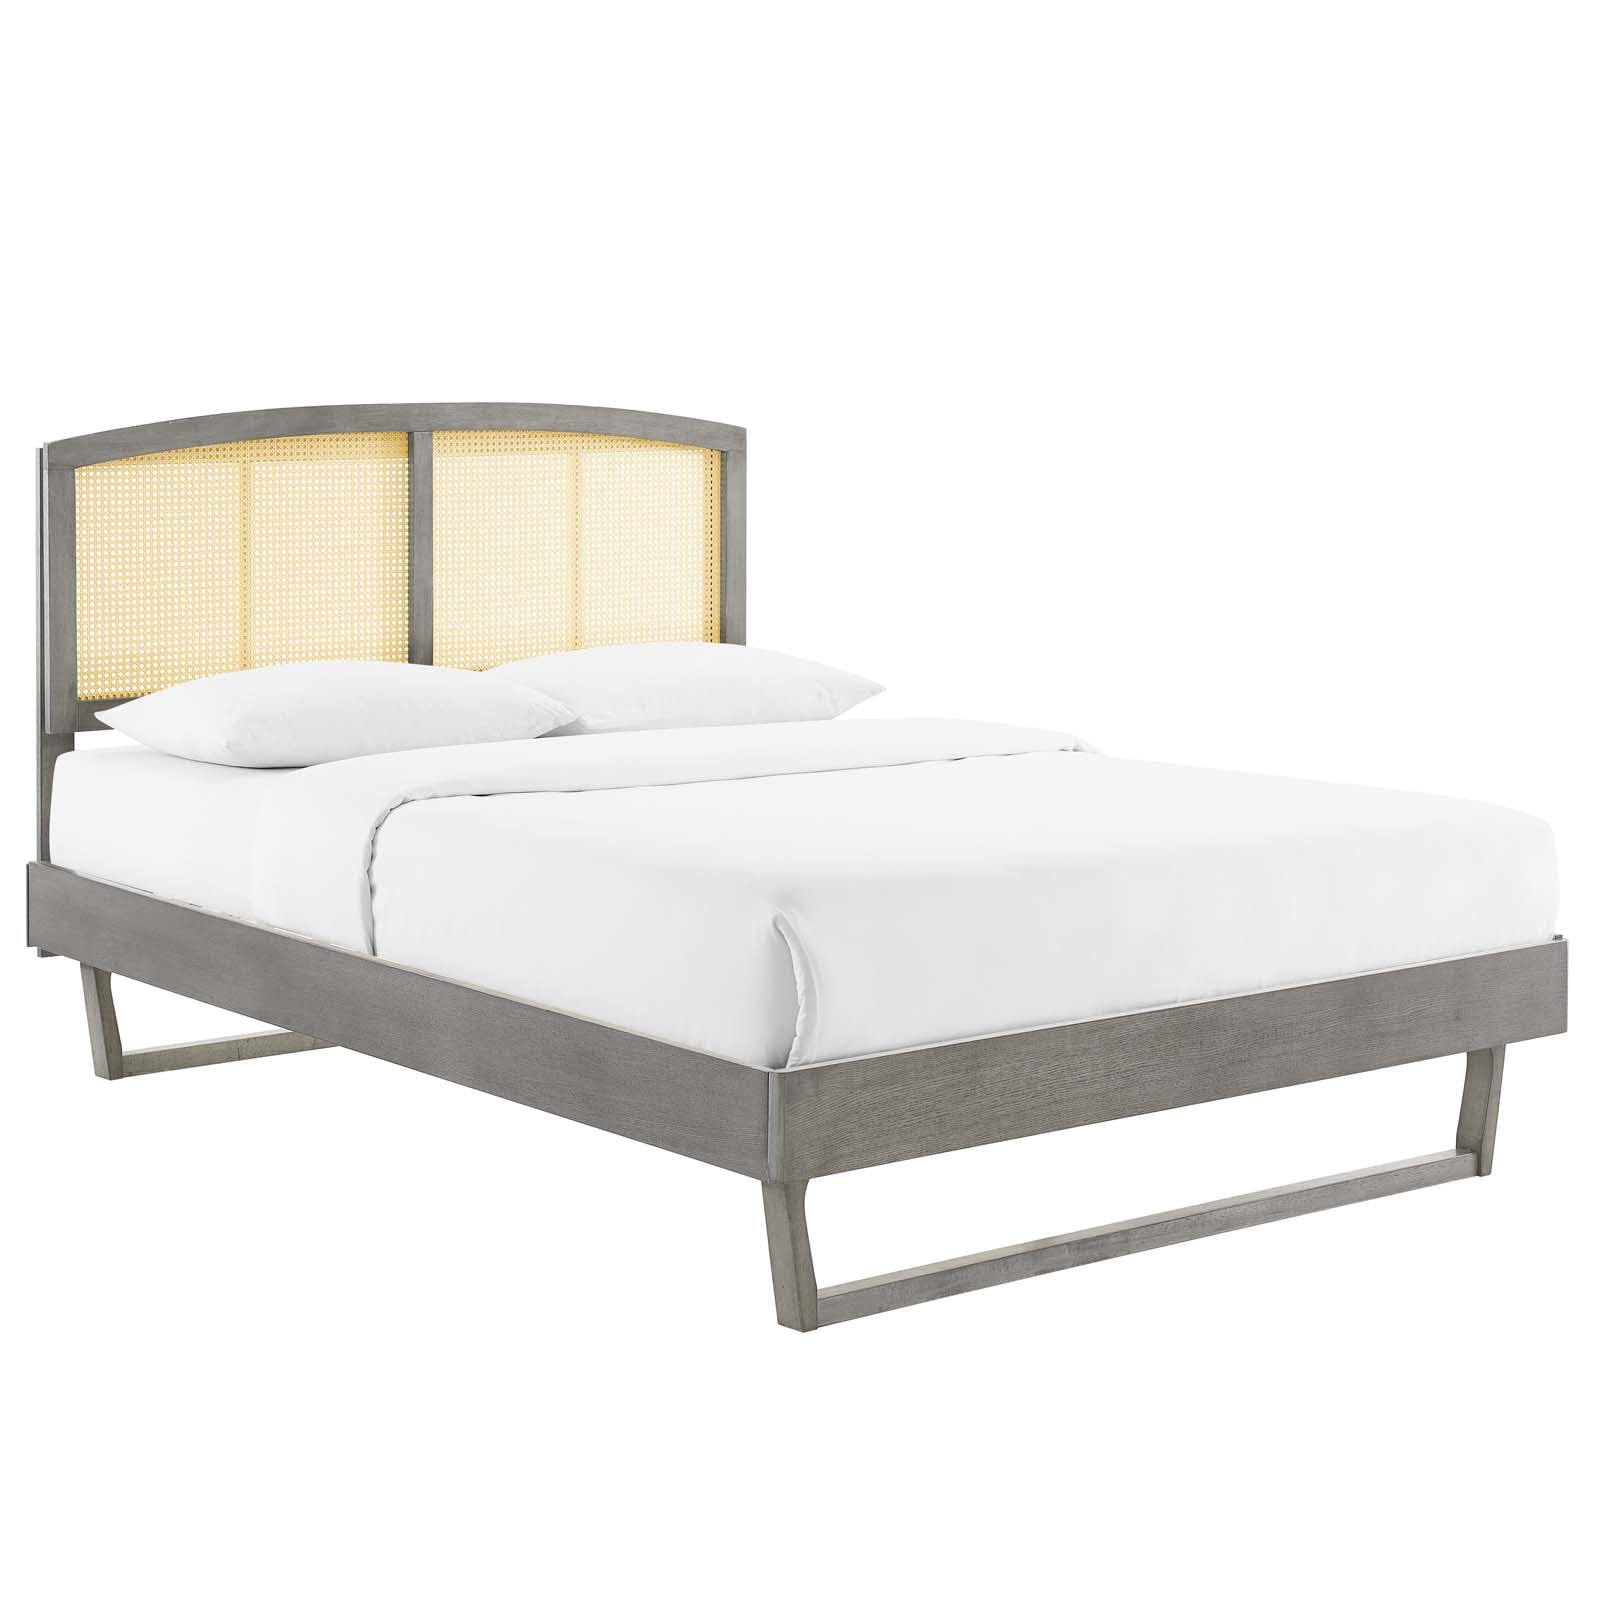 Sierra Cane and Wood King Platform Bed With Angular Legs - East Shore Modern Home Furnishings